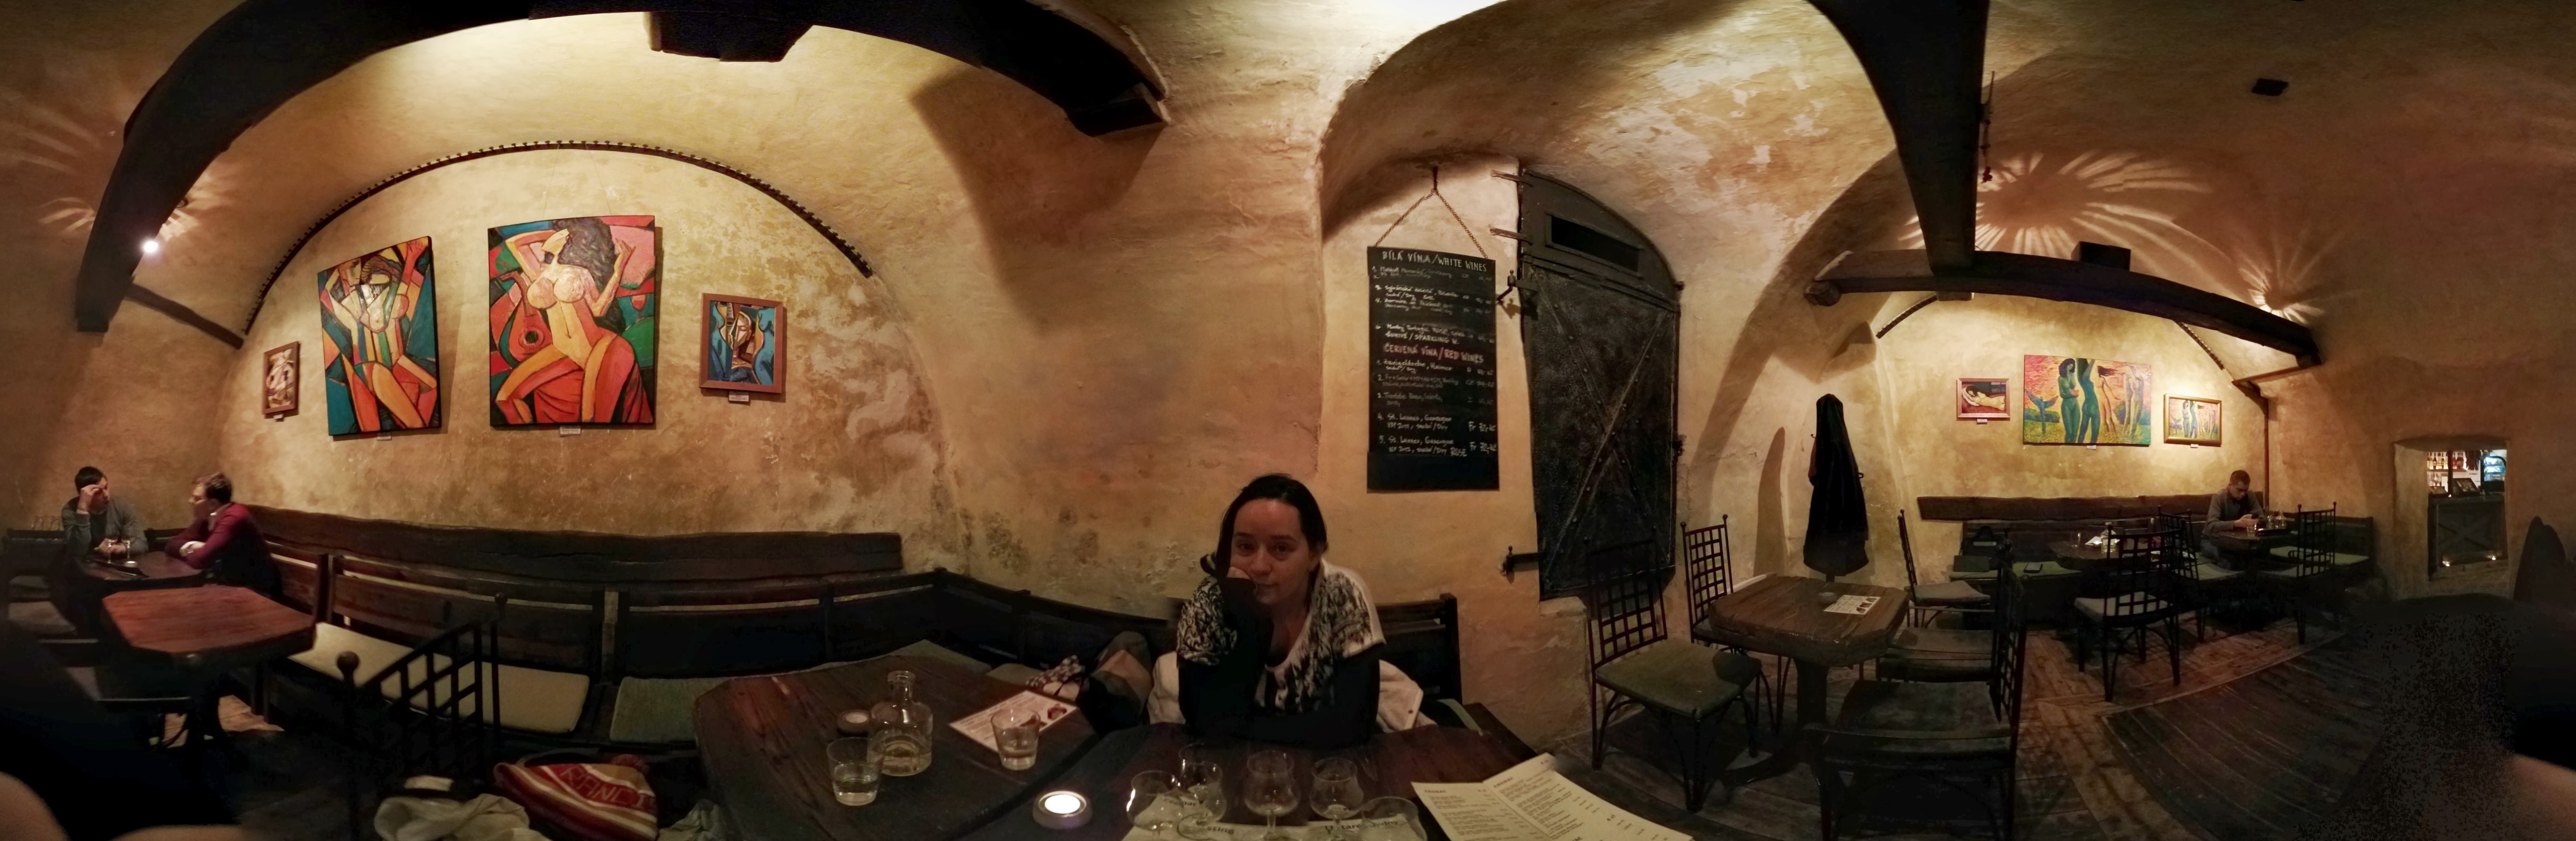 Photosphere of the hangout location